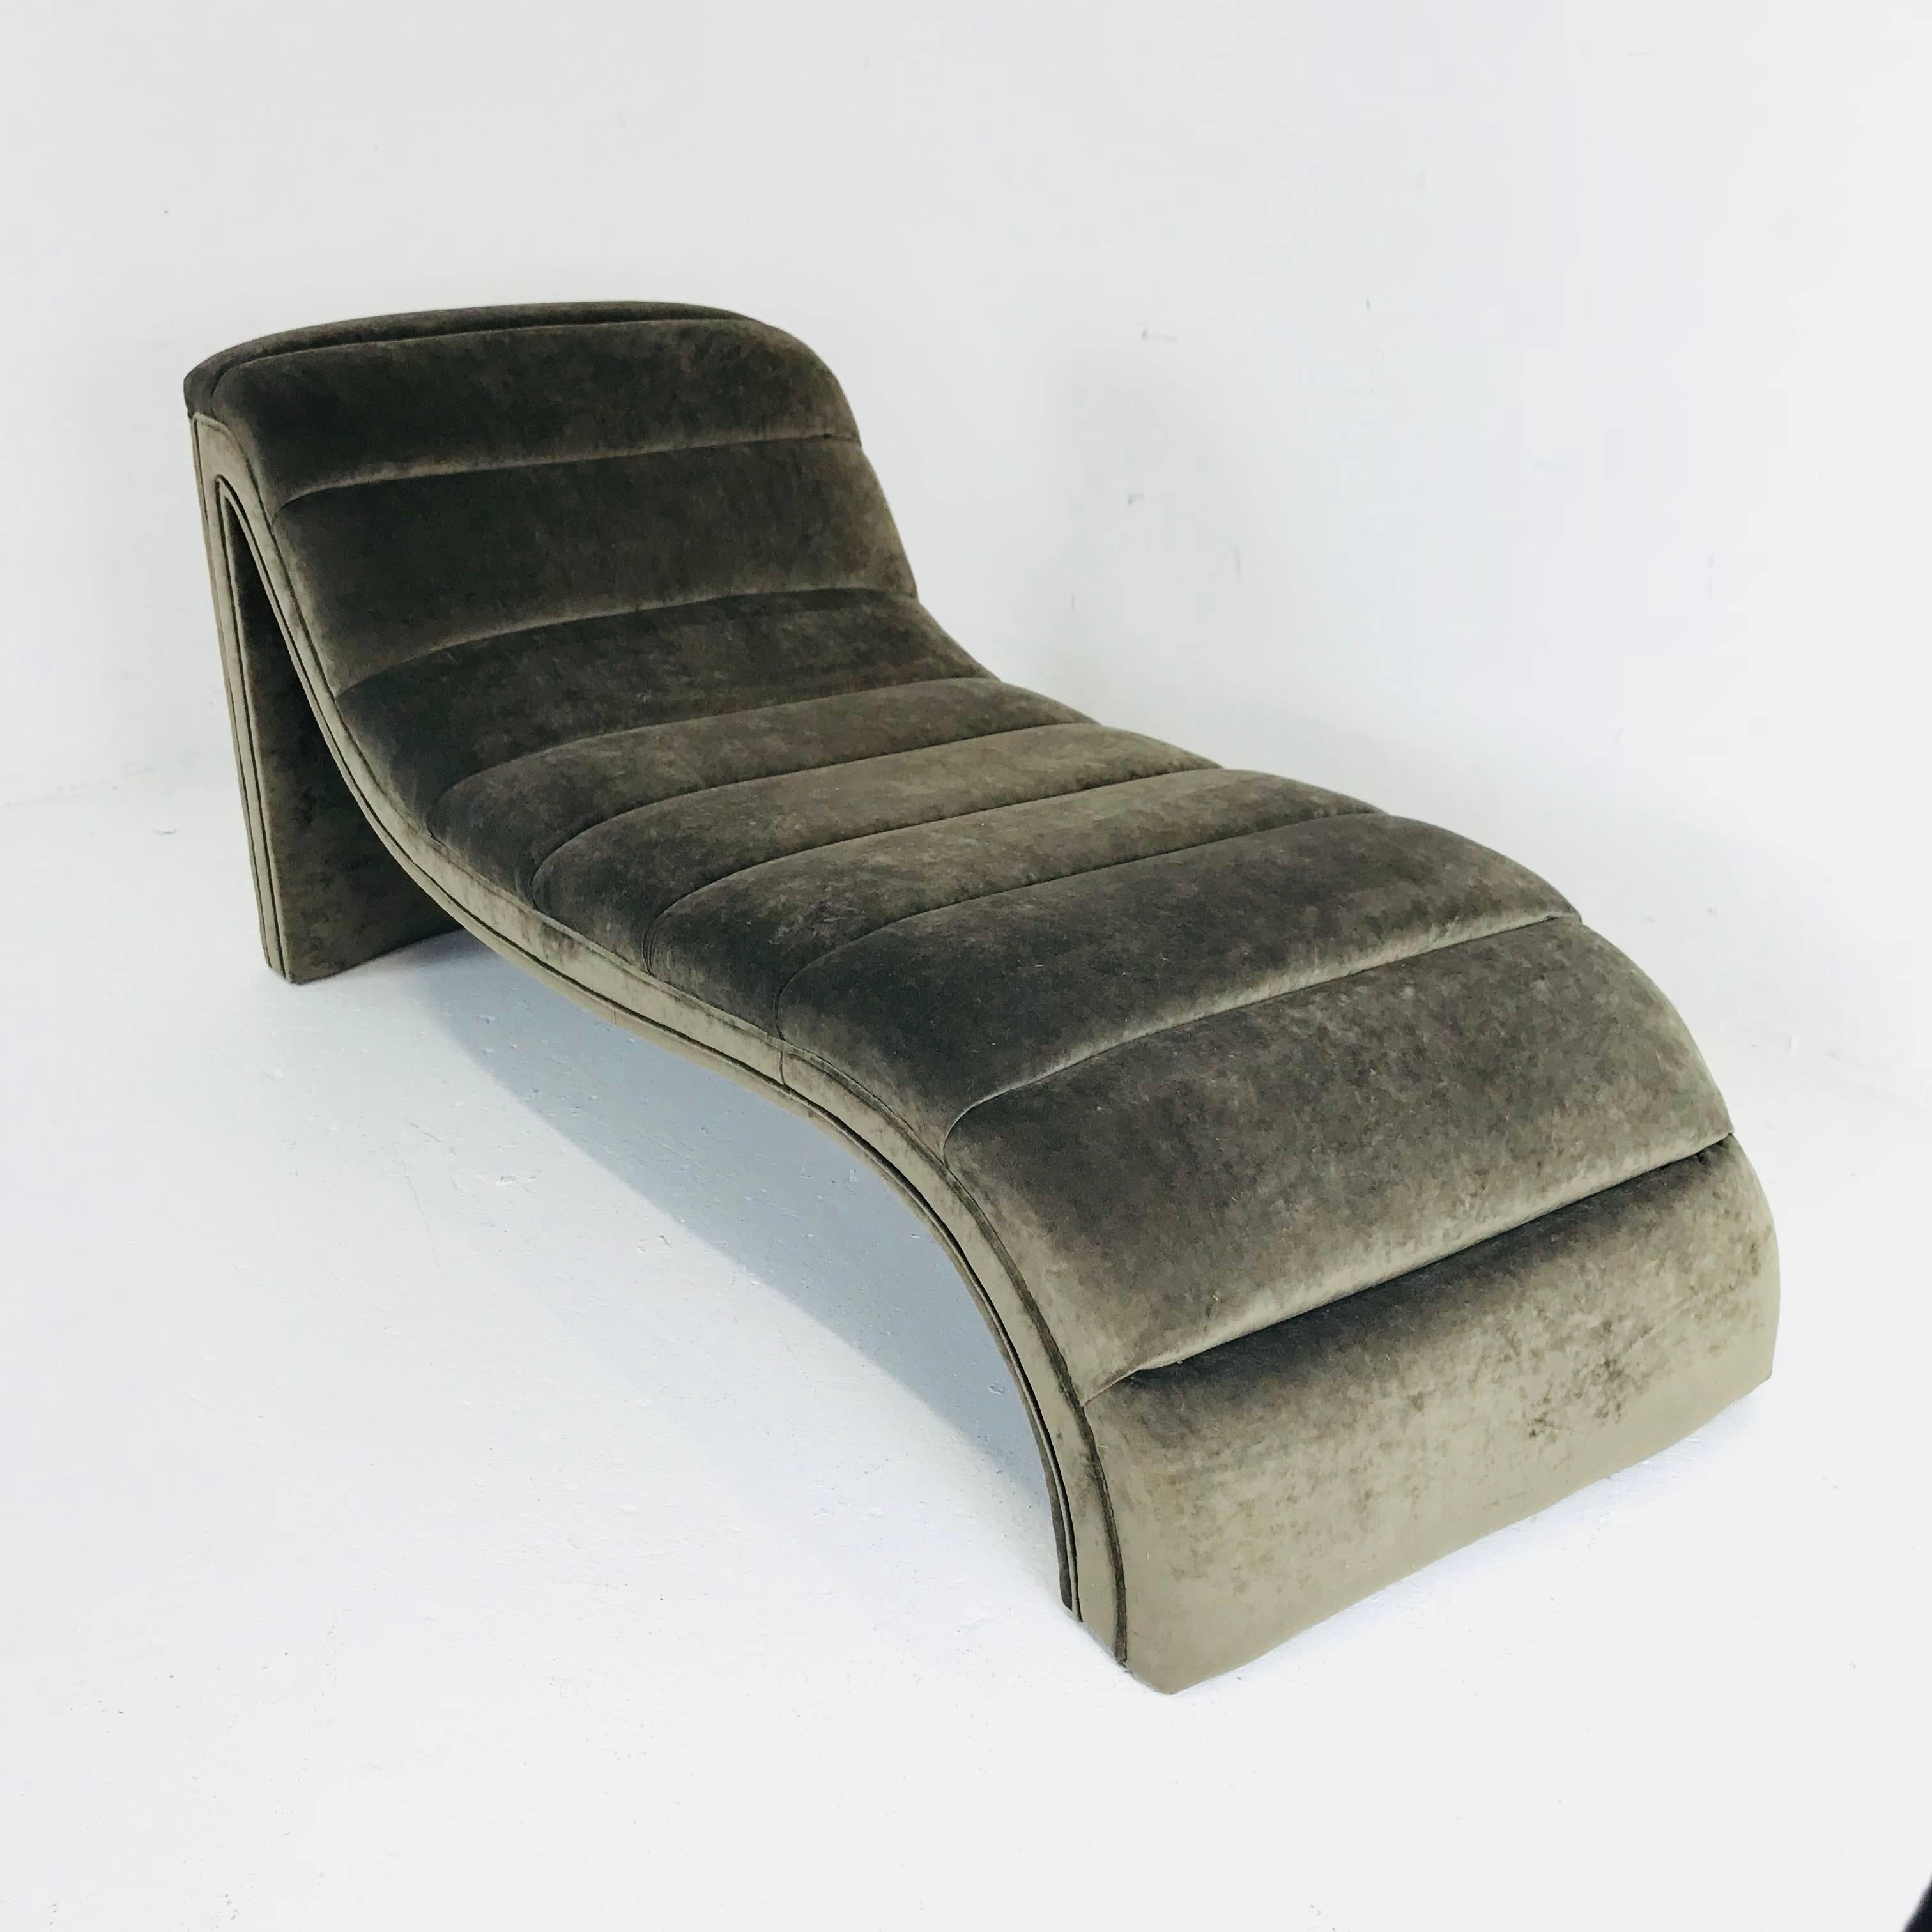 Chaise lounge, custom. We can make this piece in the olive green velvet pictured or customer's choice of fabric with COM.
For custom orders please allow a 6-8 week lead time.

Dimensions: 66